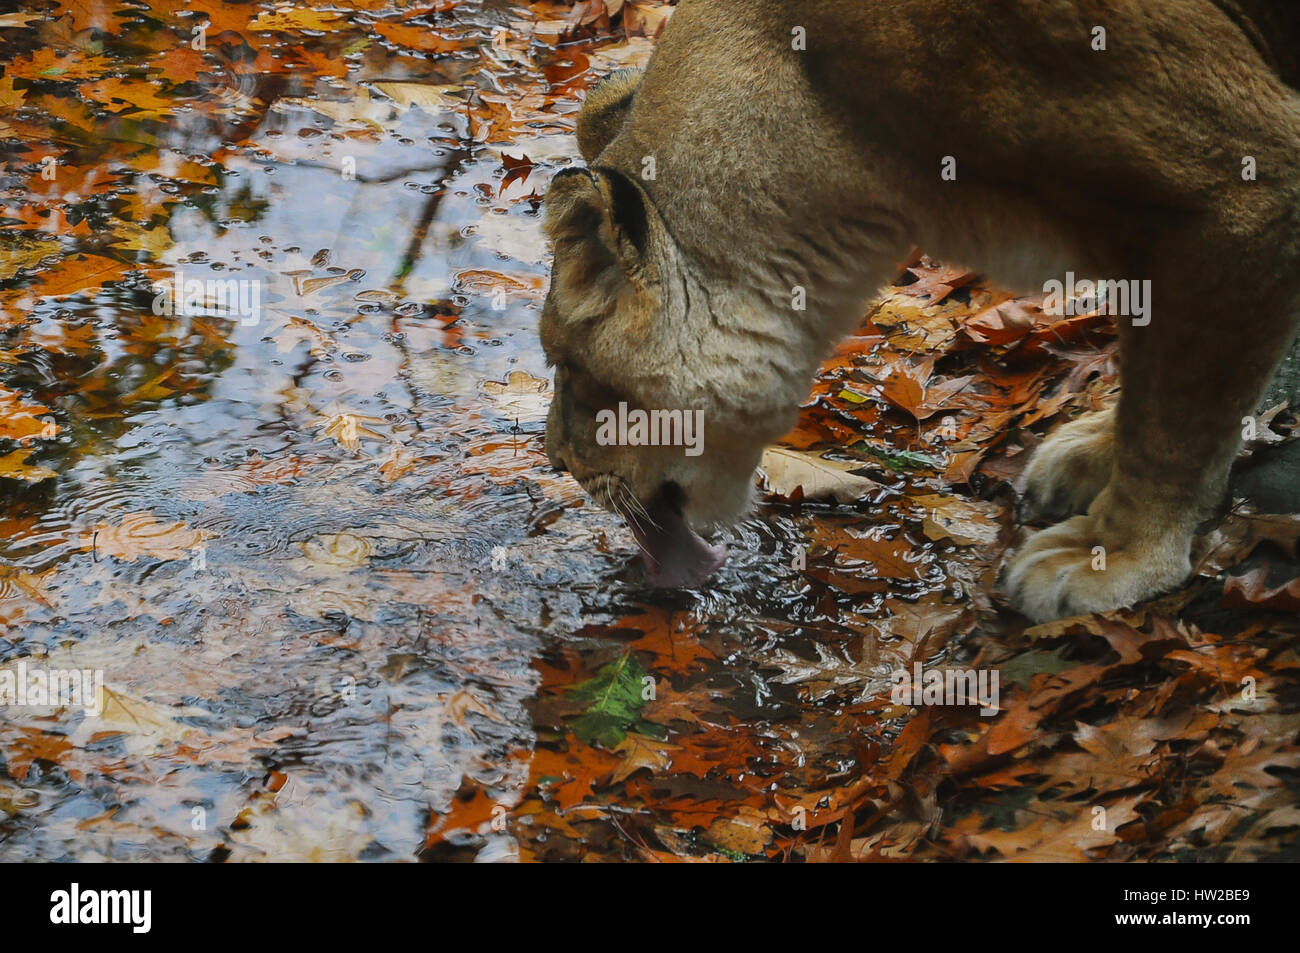 Lioness drinking water from a small stream Stock Photo